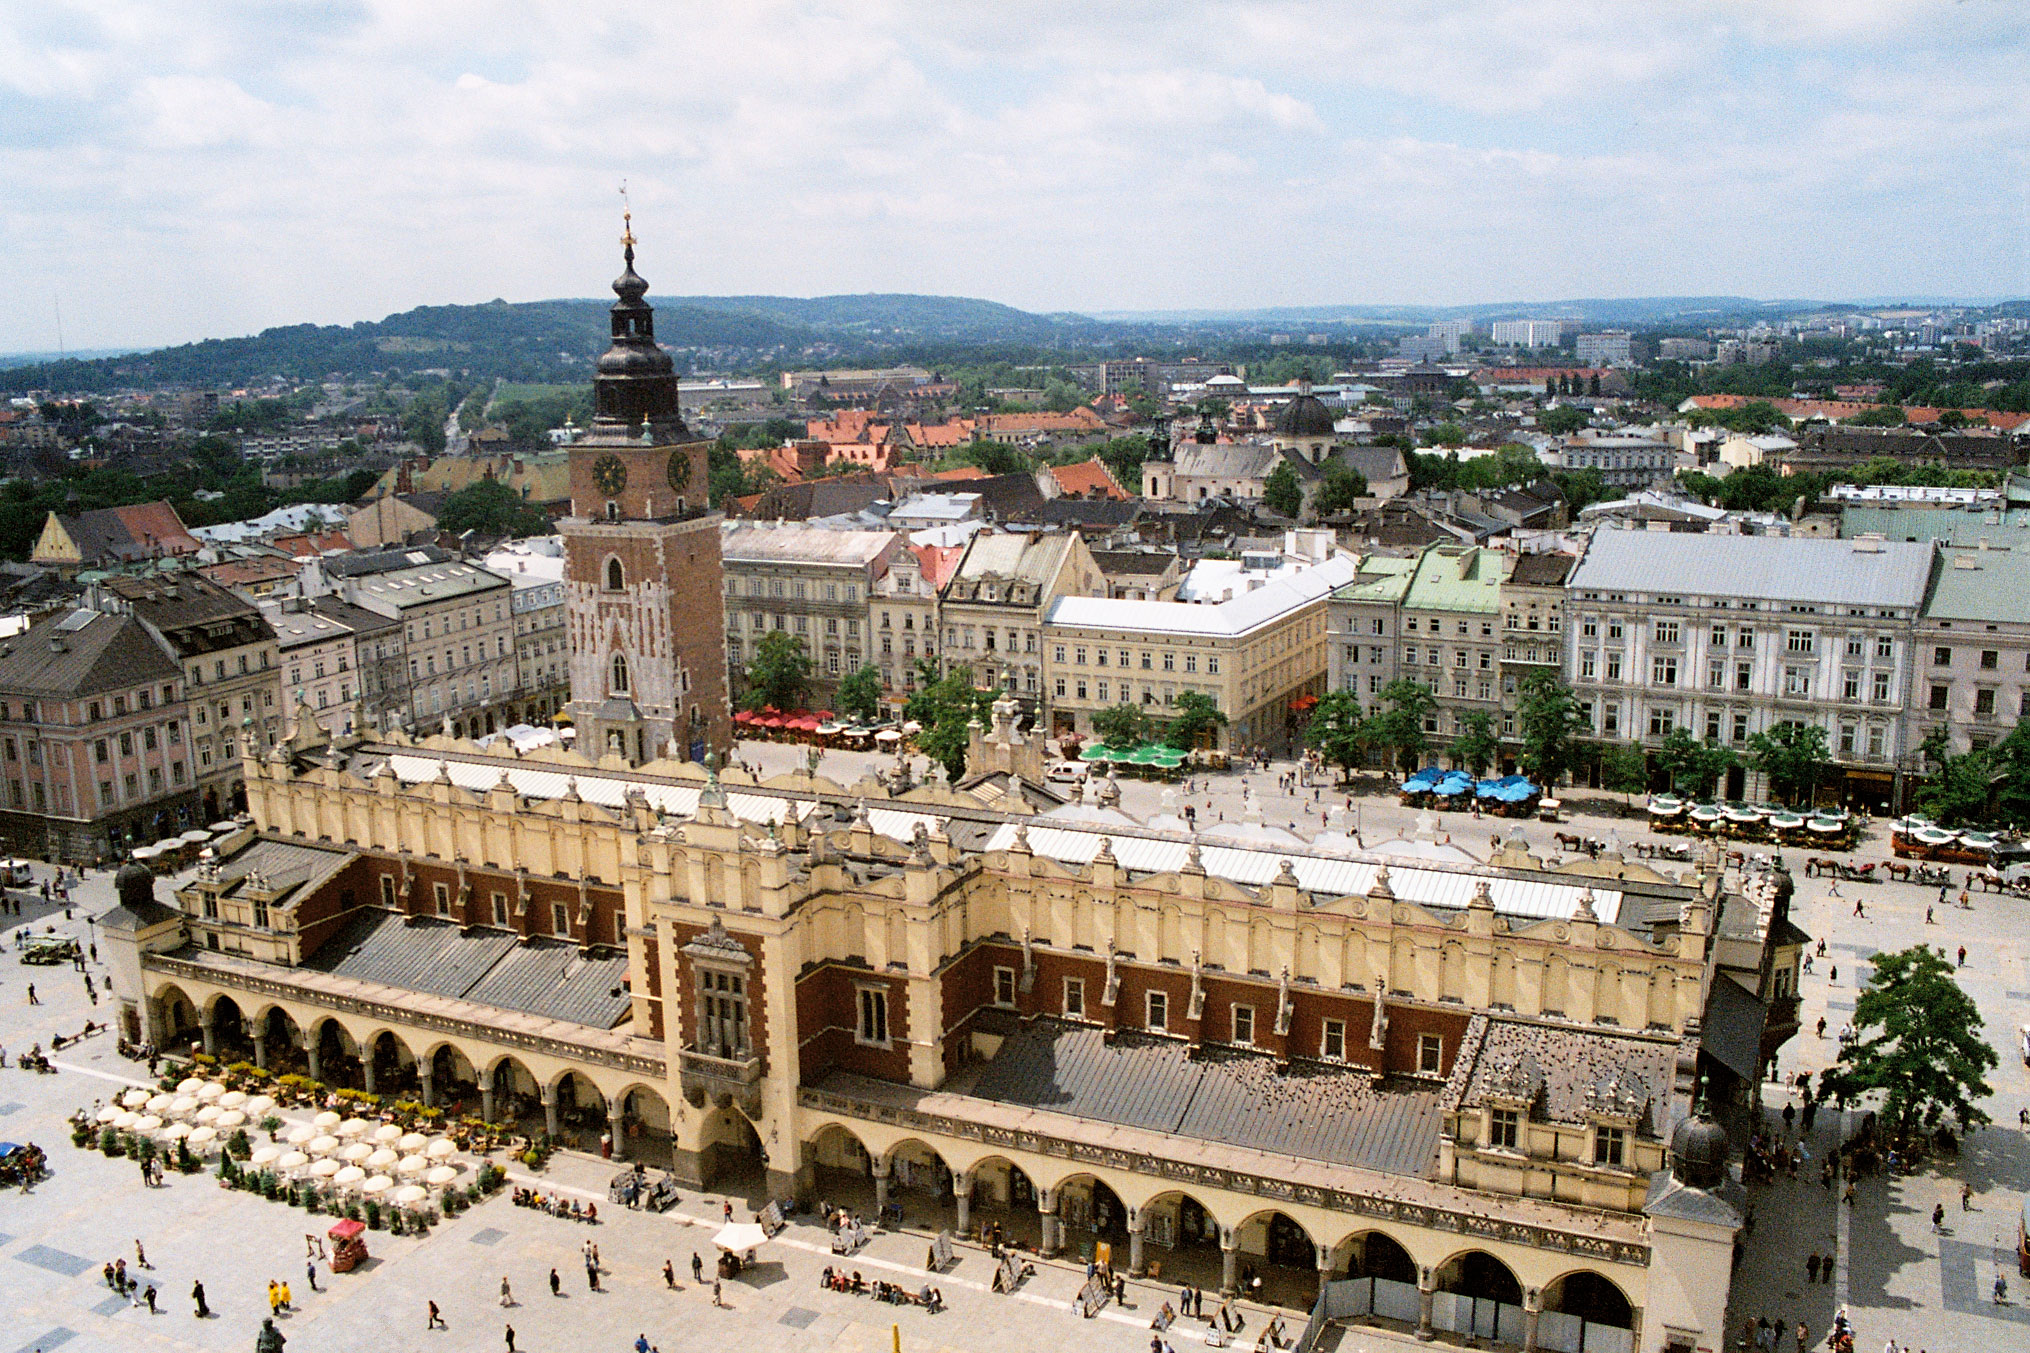 Cracow, the Old City Market  with the famous “Cloth Hall/ Sukiennice”